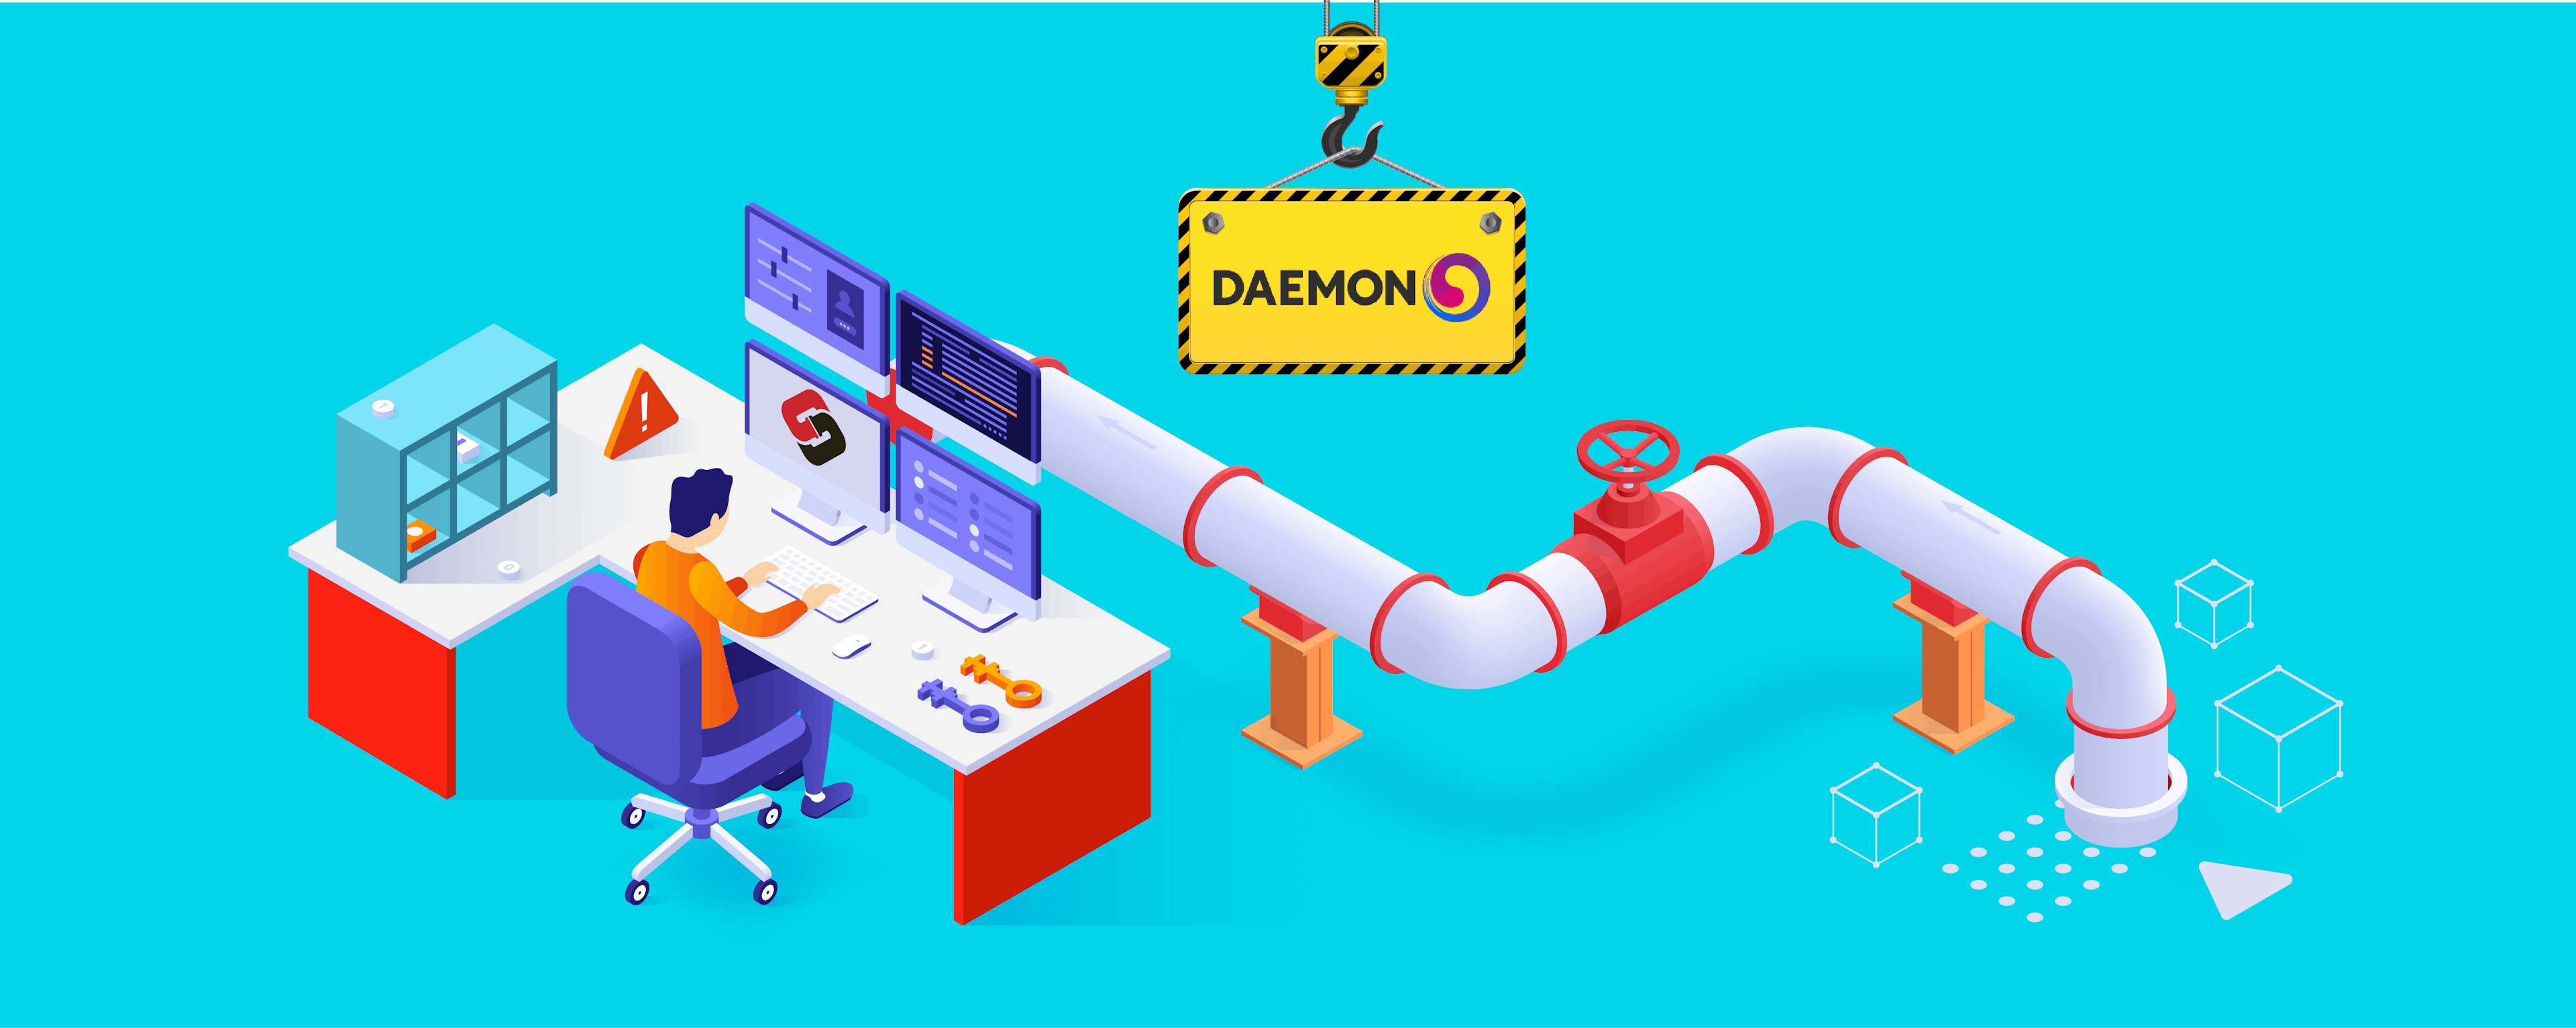 Daemon extends Steampipe's AWS Well-Architected Mod to improve workload assessments